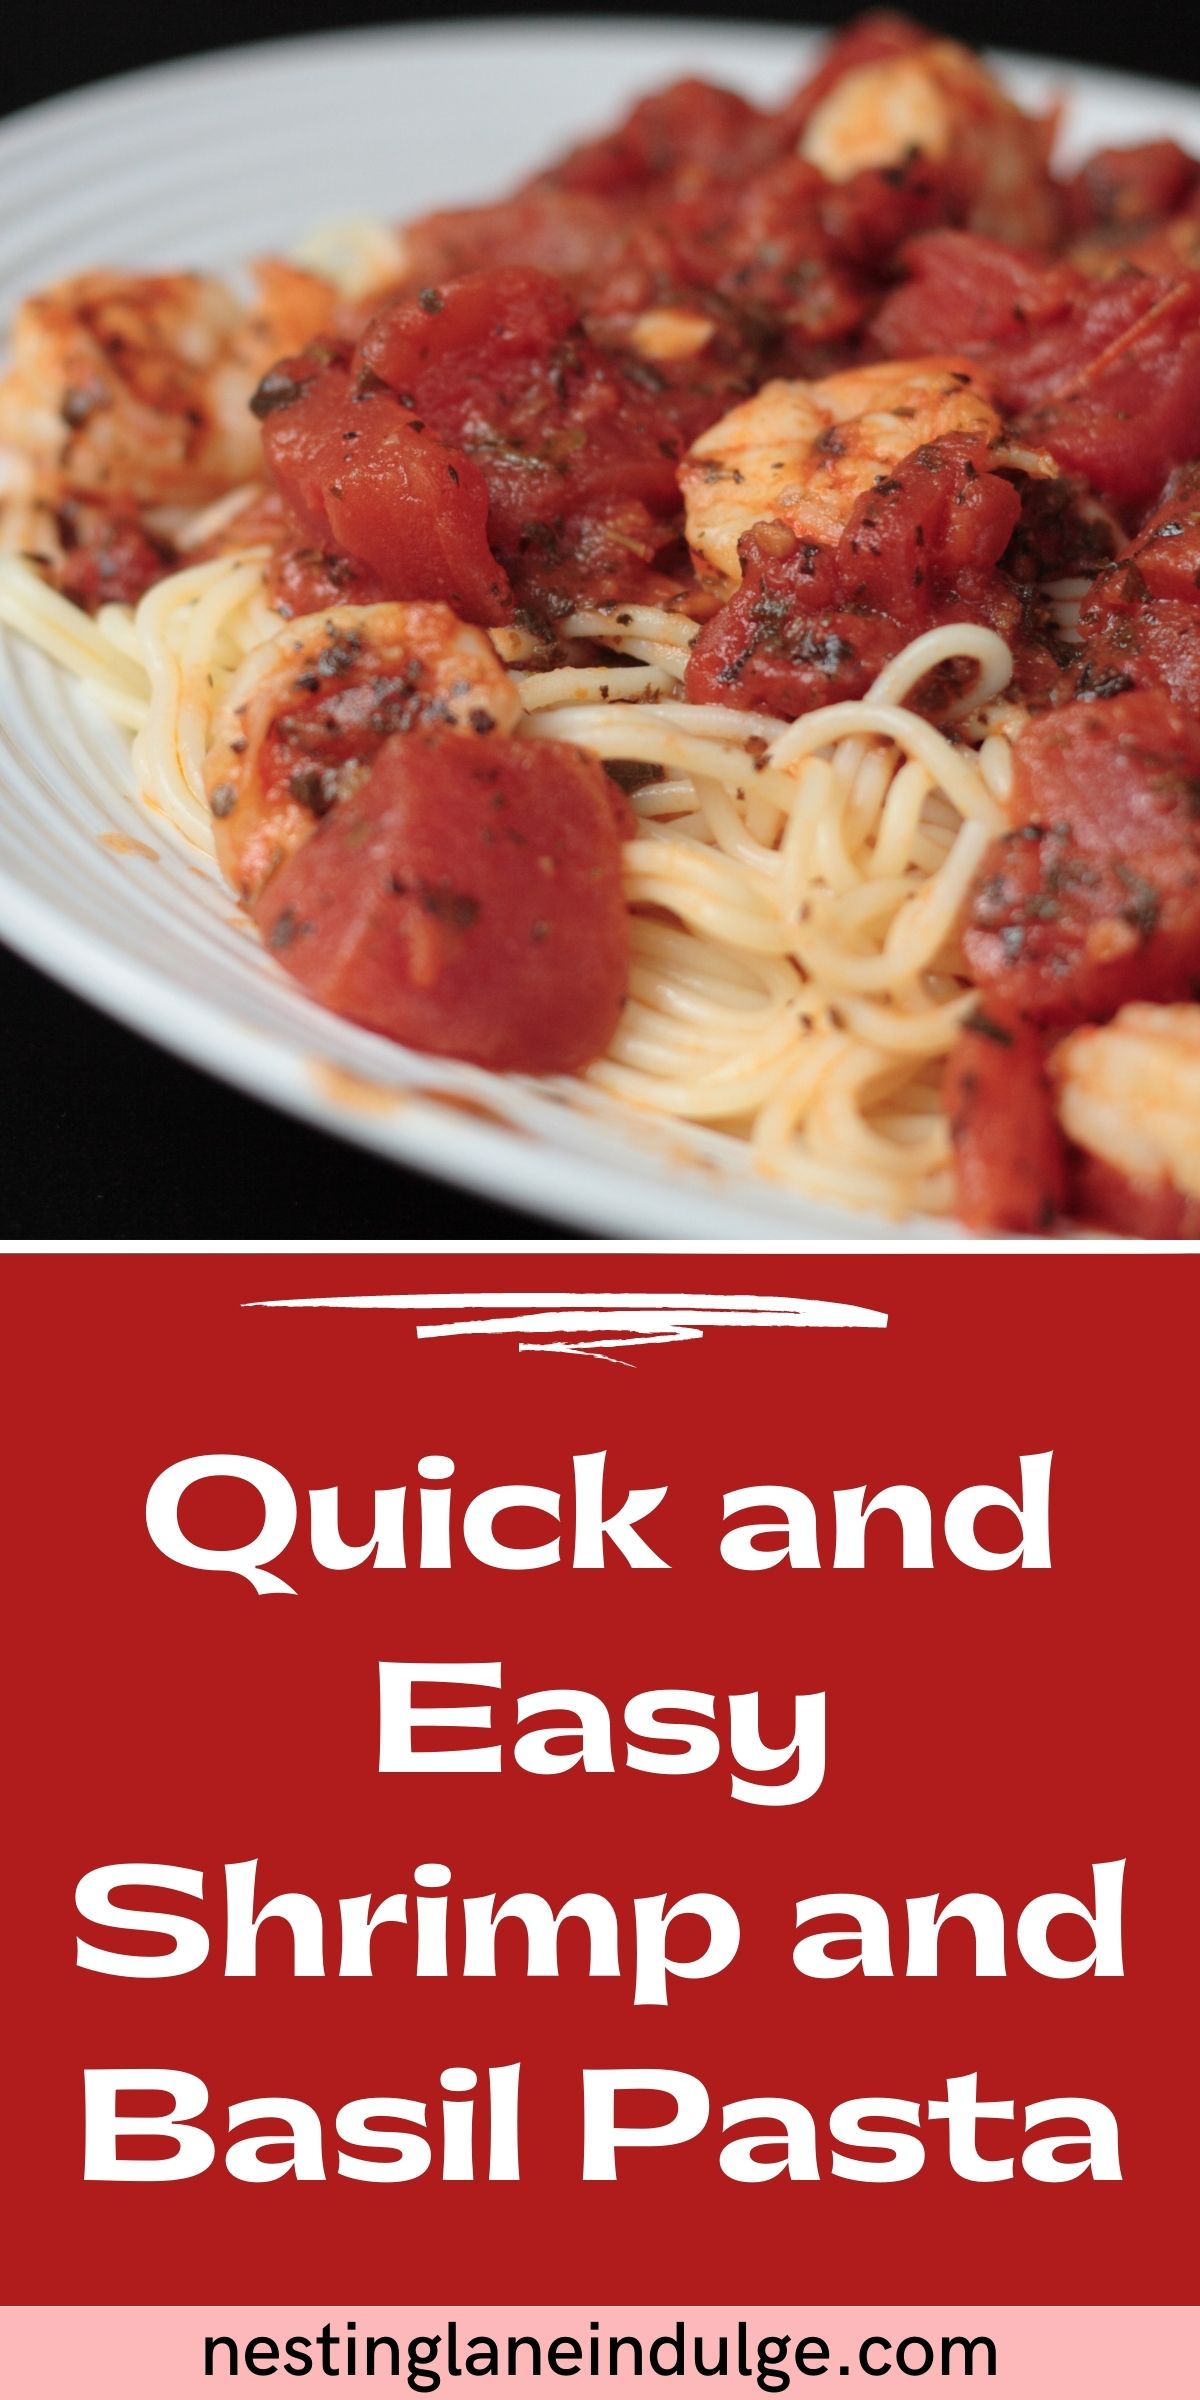 Graphic for Pinterest of Quick and Easy Shrimp and Basil Pasta Recipe